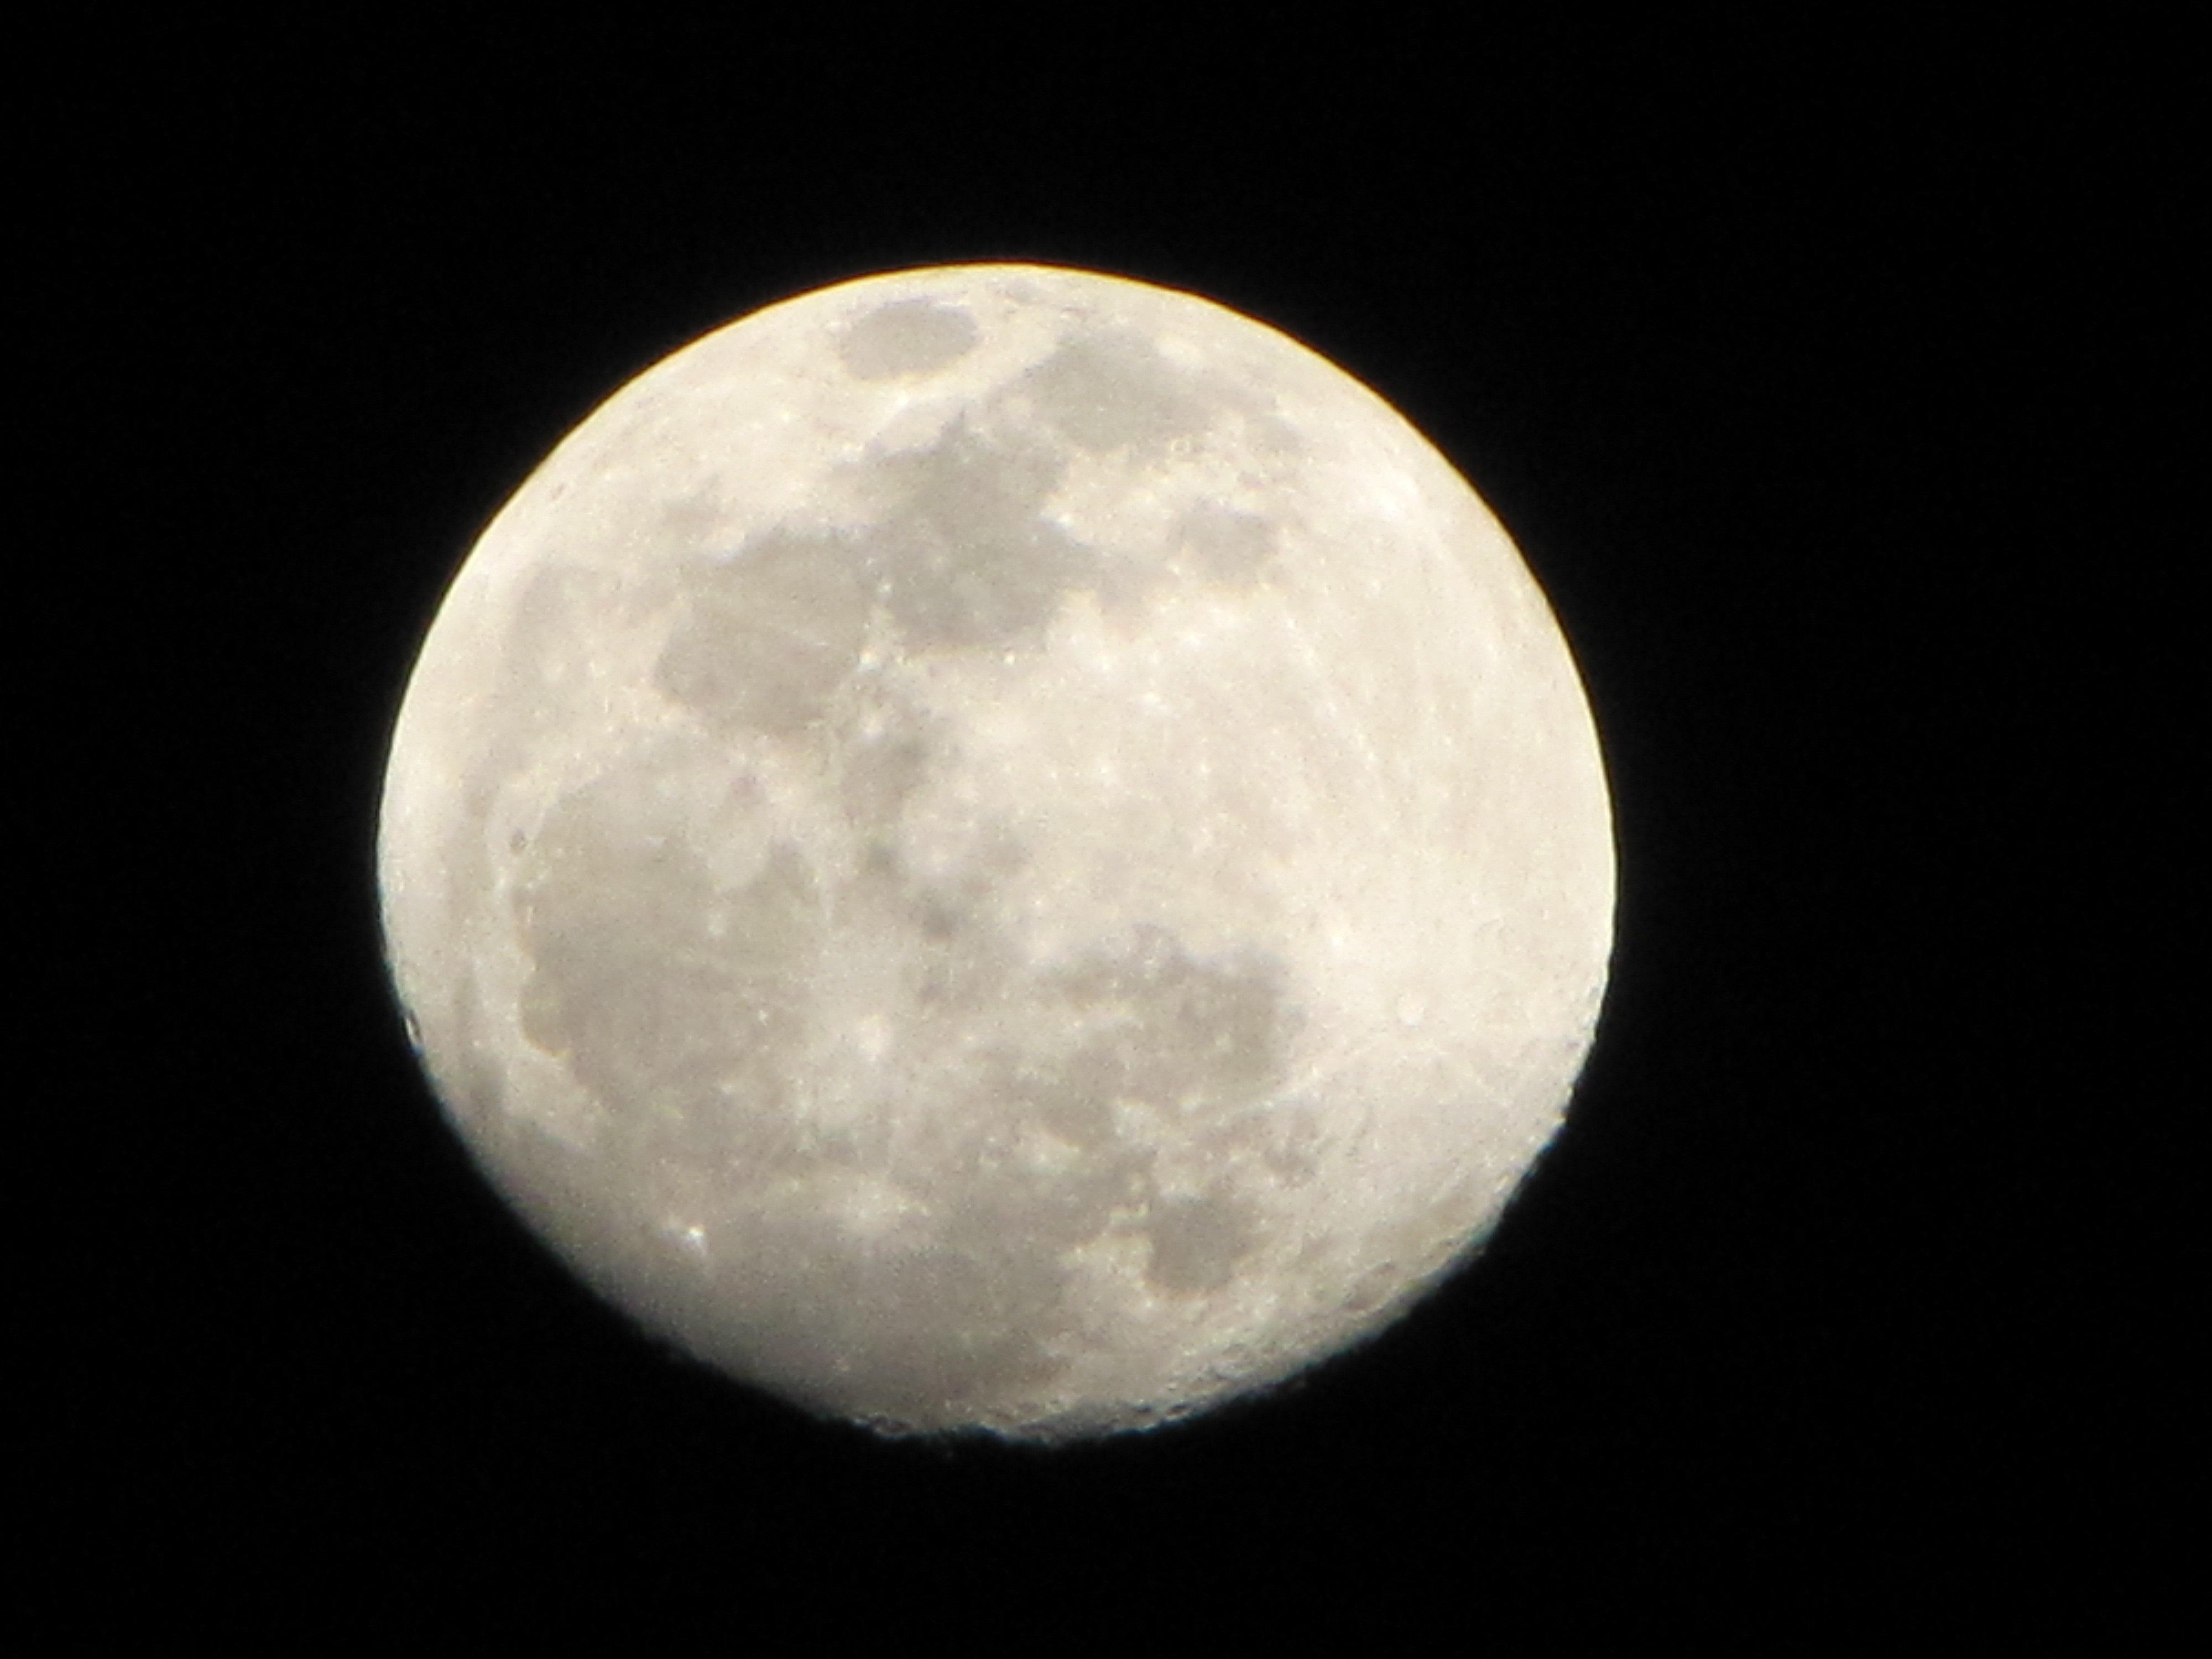 Photpgraph of nearly full moon